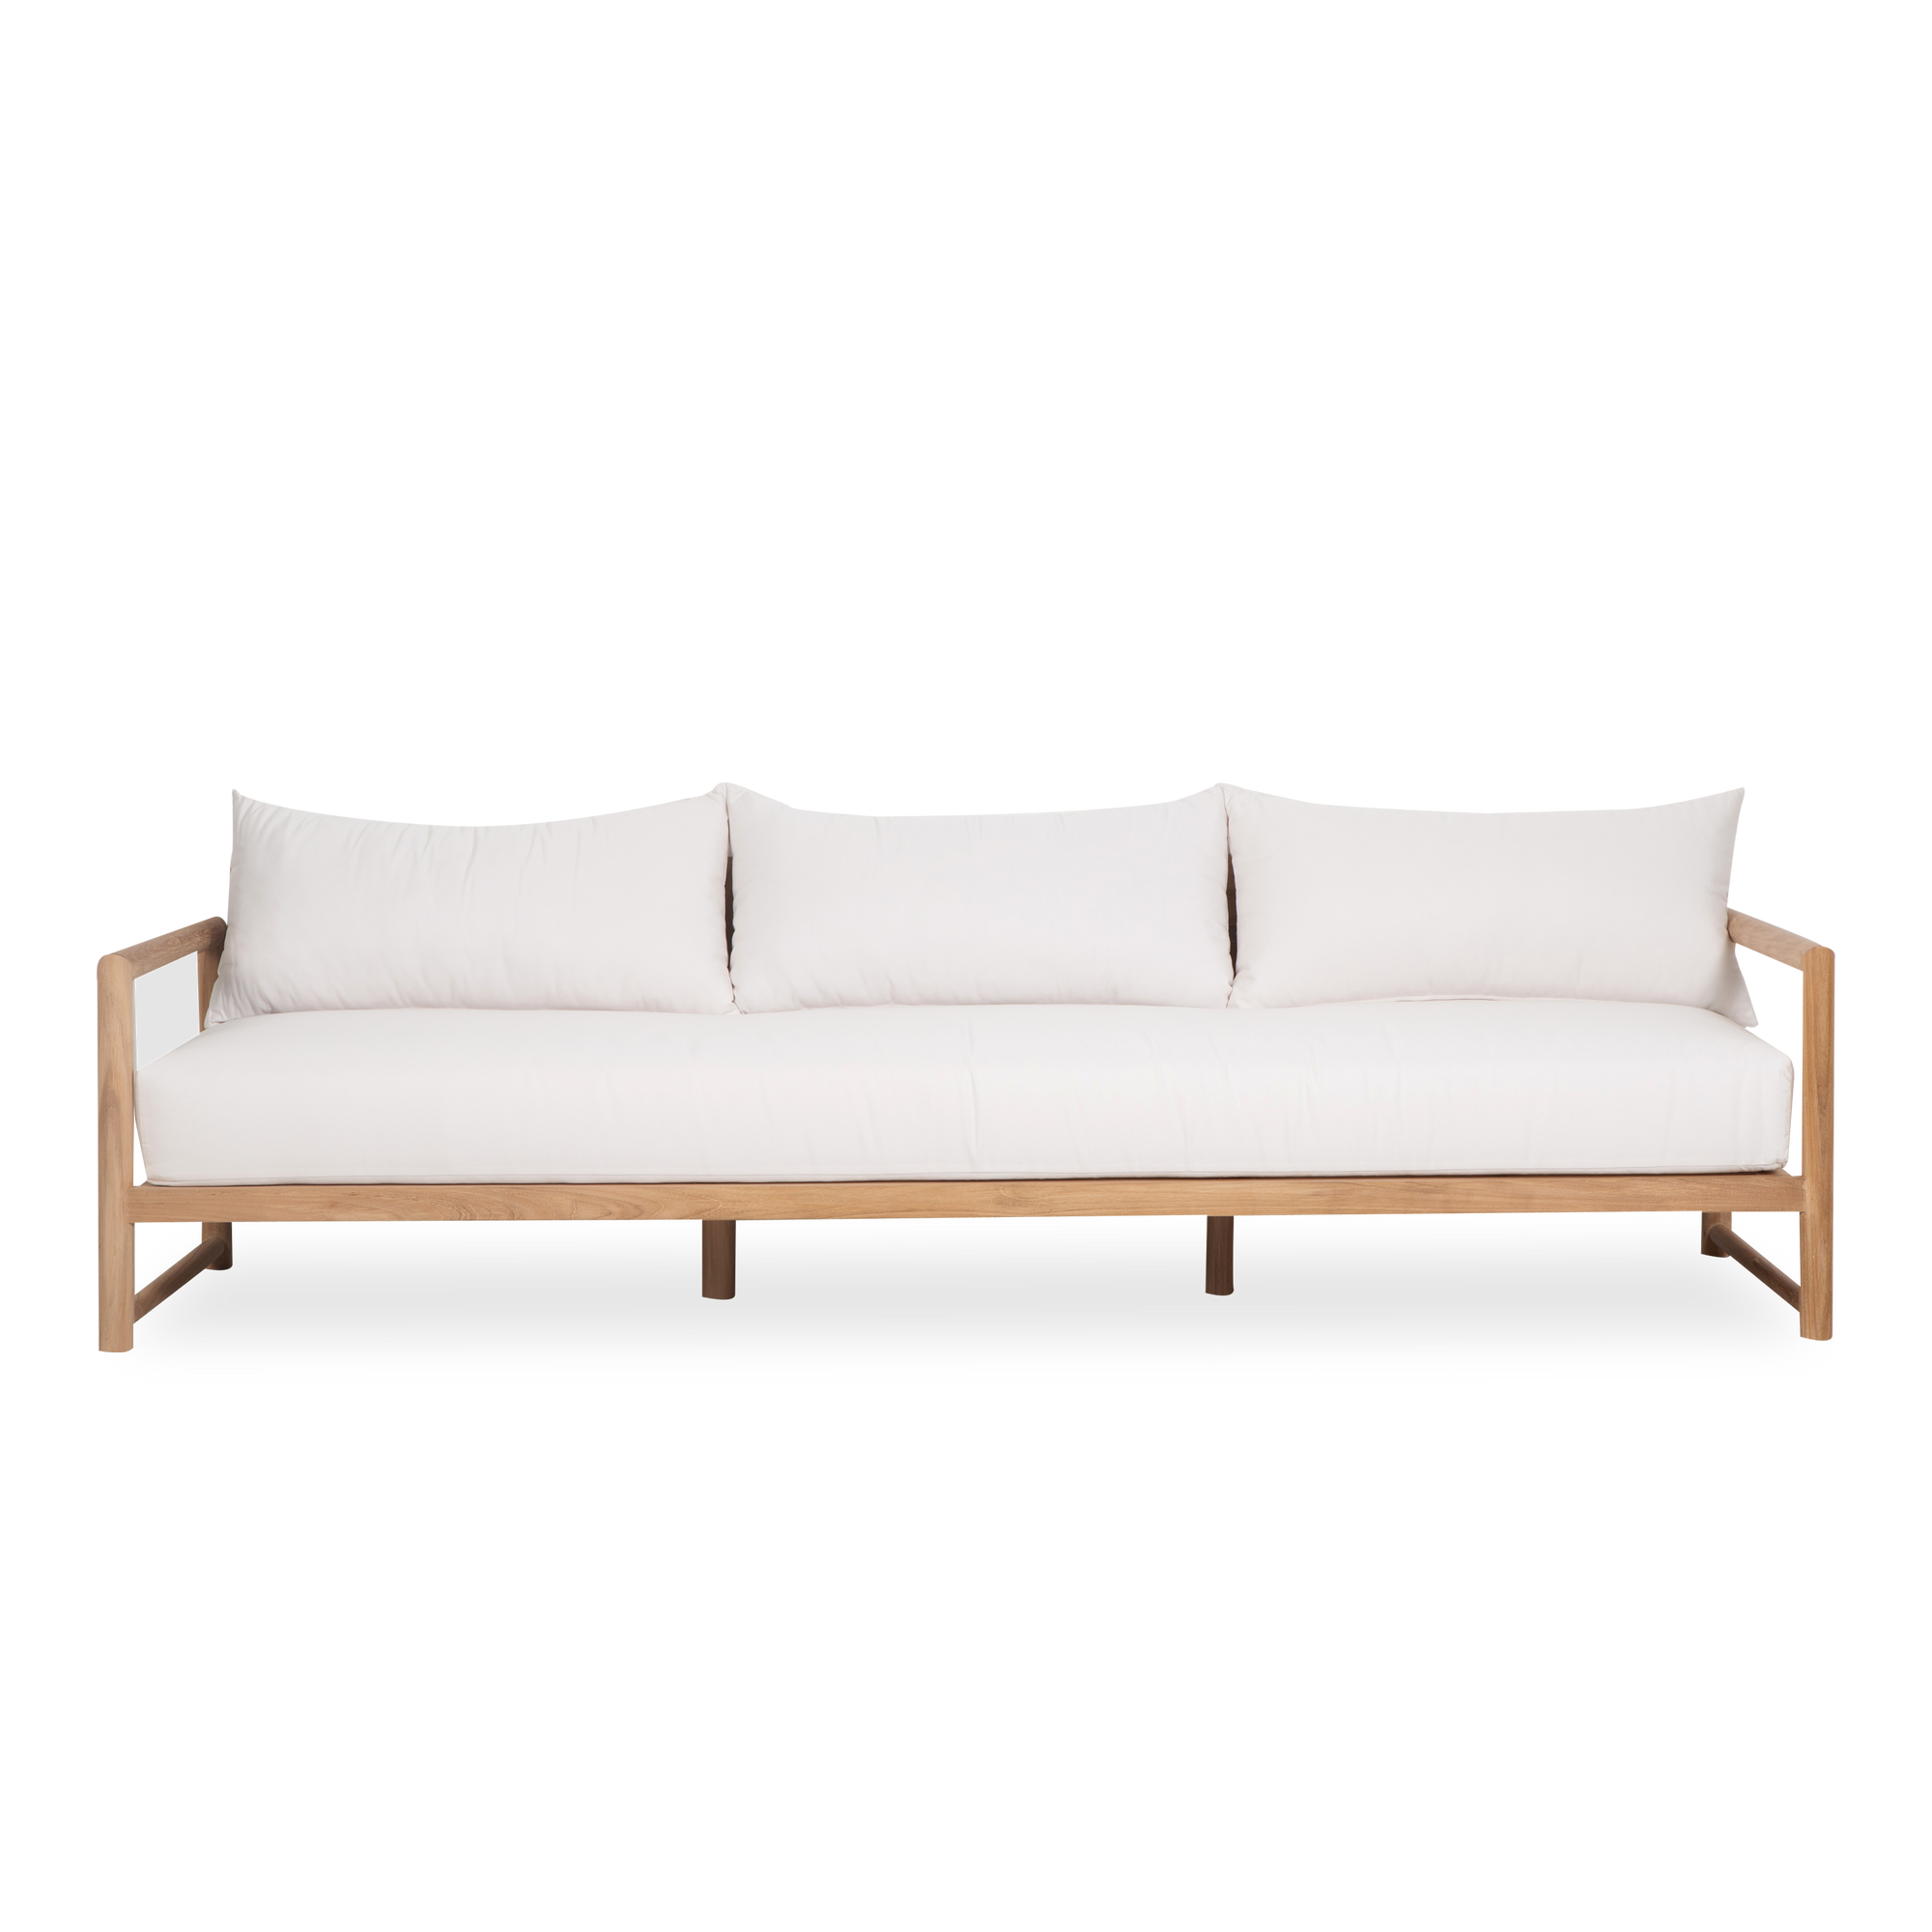 Balancing a modern aesthetic with alluring design, the Breeze XL Teak Sofa sets the tone for laidback outdoor lounging.